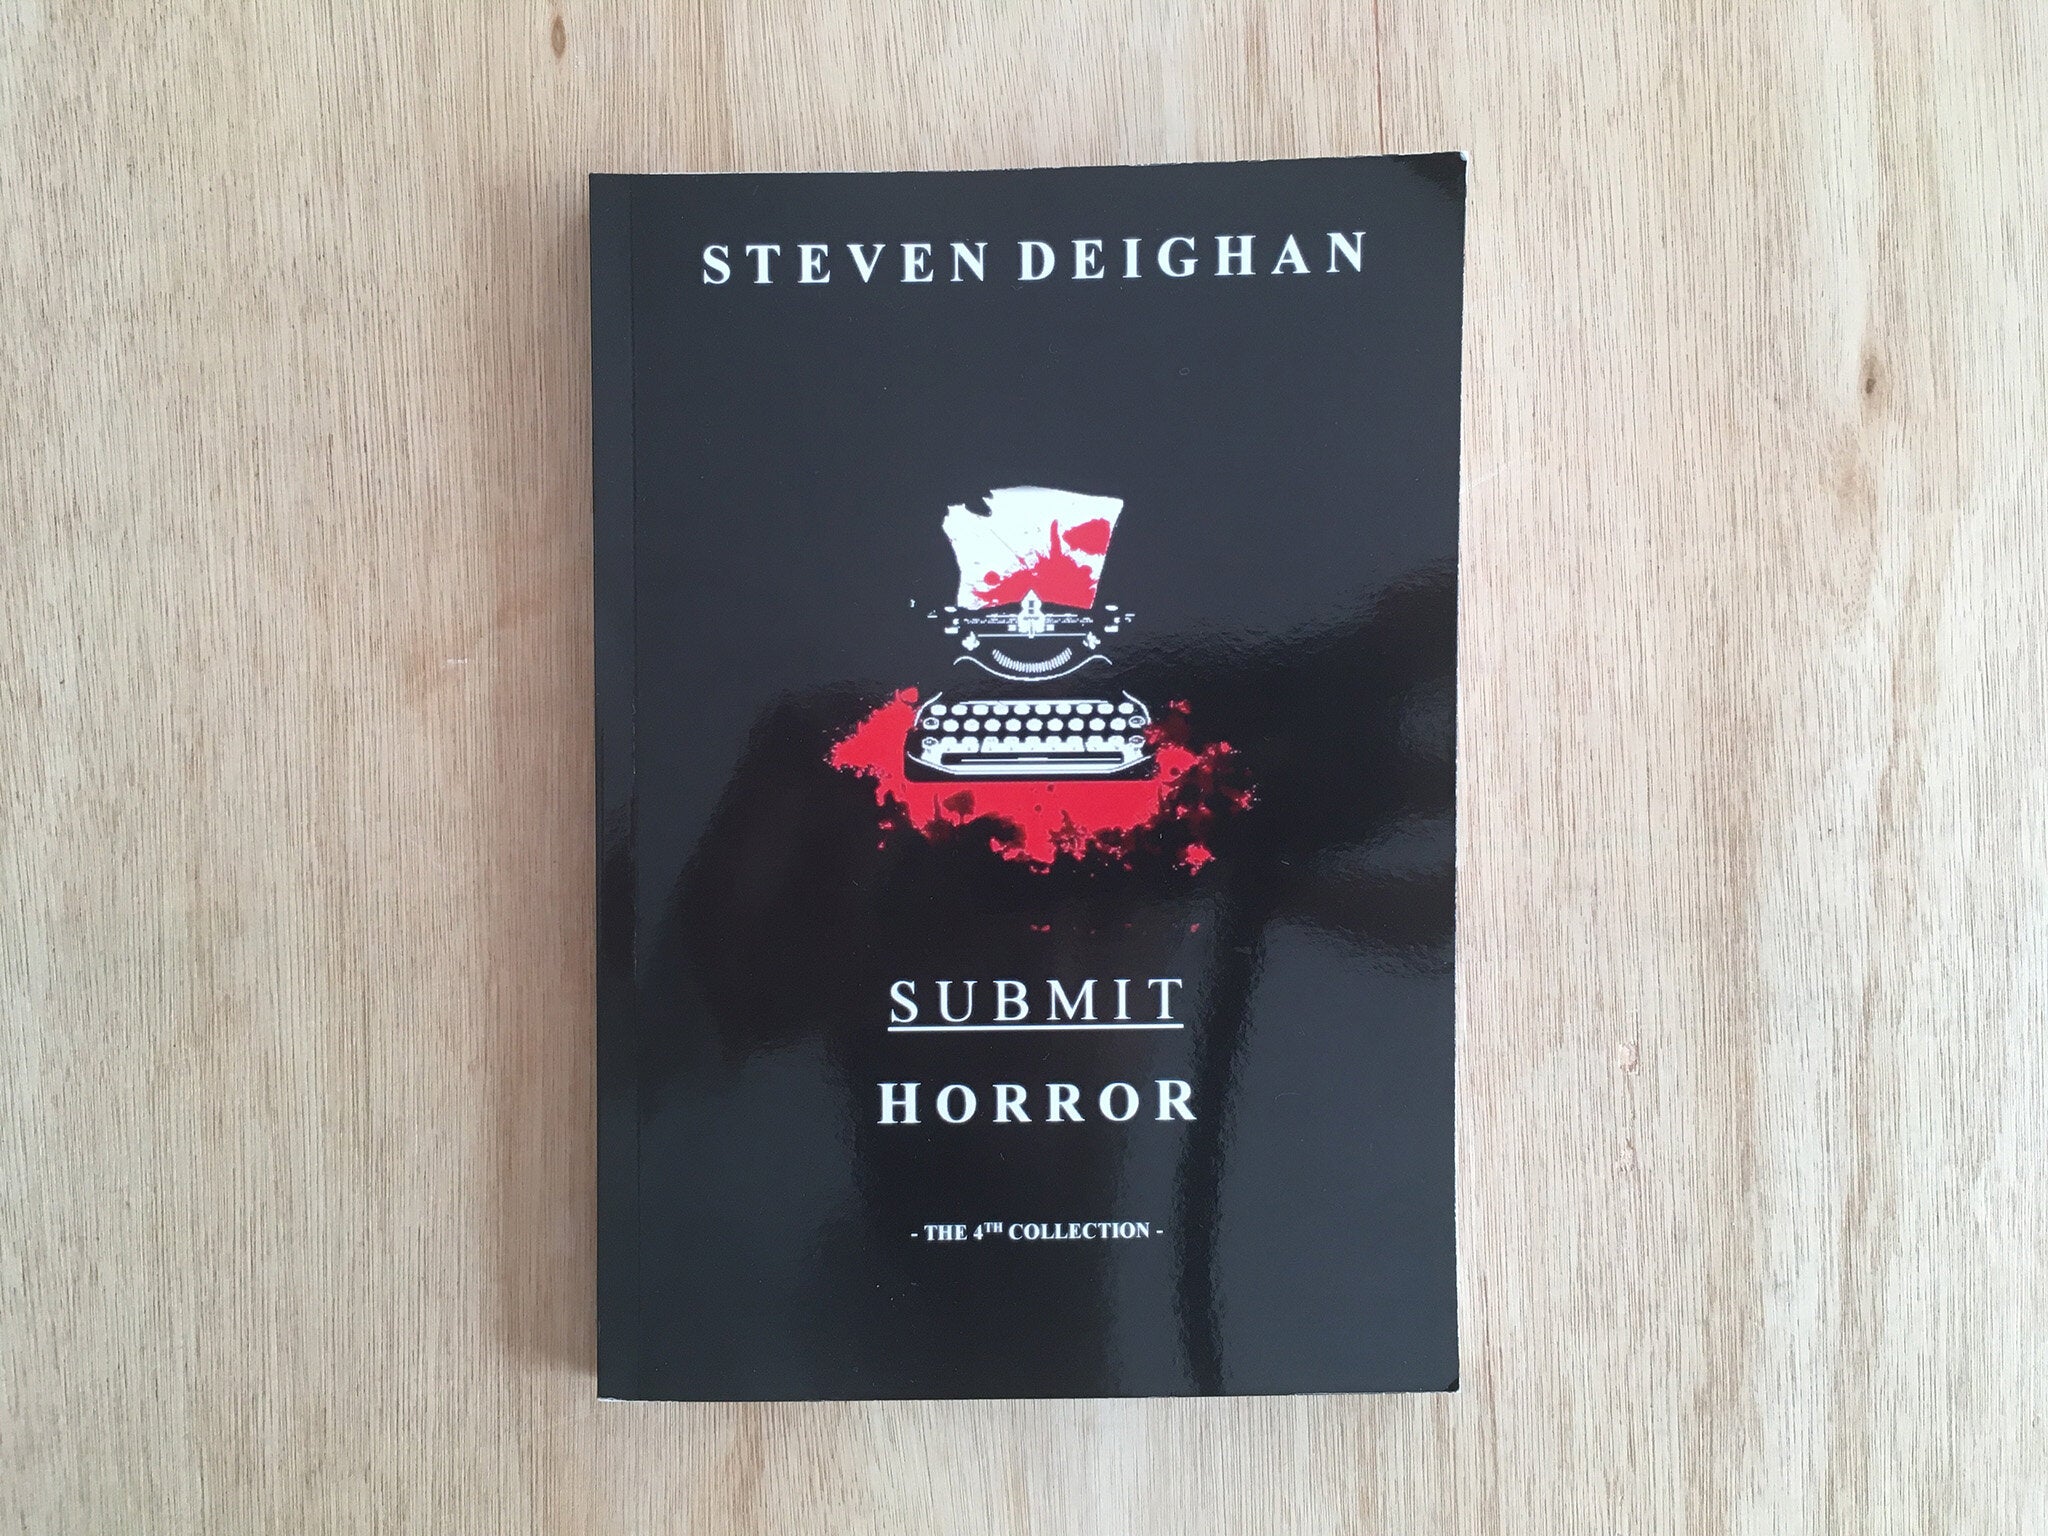 SUBMIT HORROR by Steven Deighan